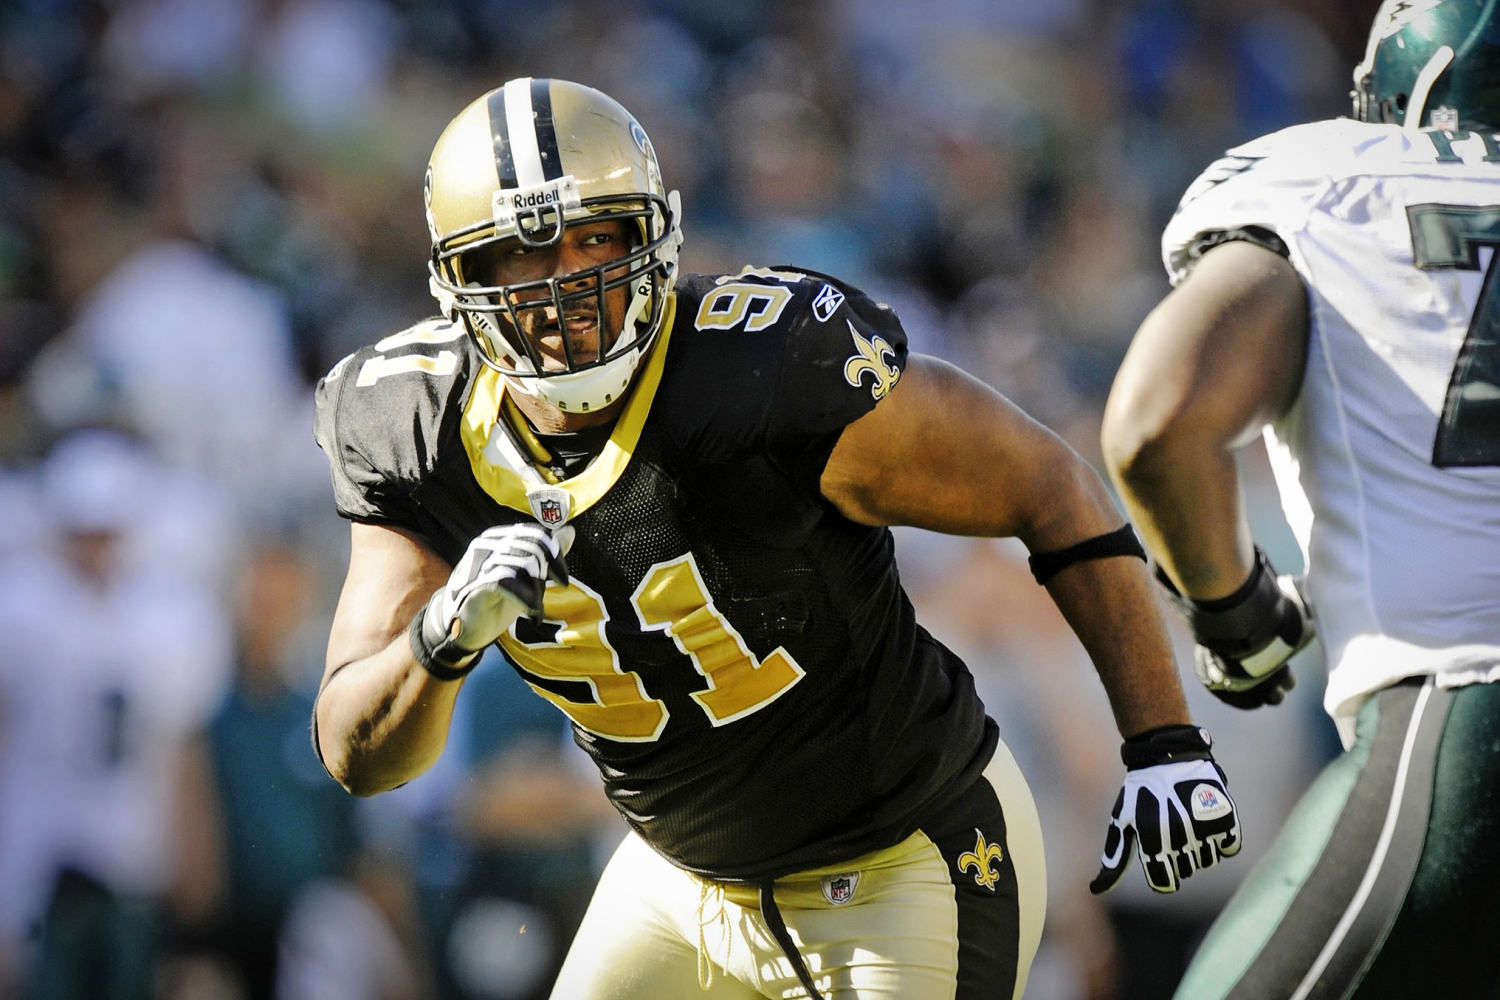 Man who fatally shot ex-Saints star Will Smith after a car crash gets 25 years in prison